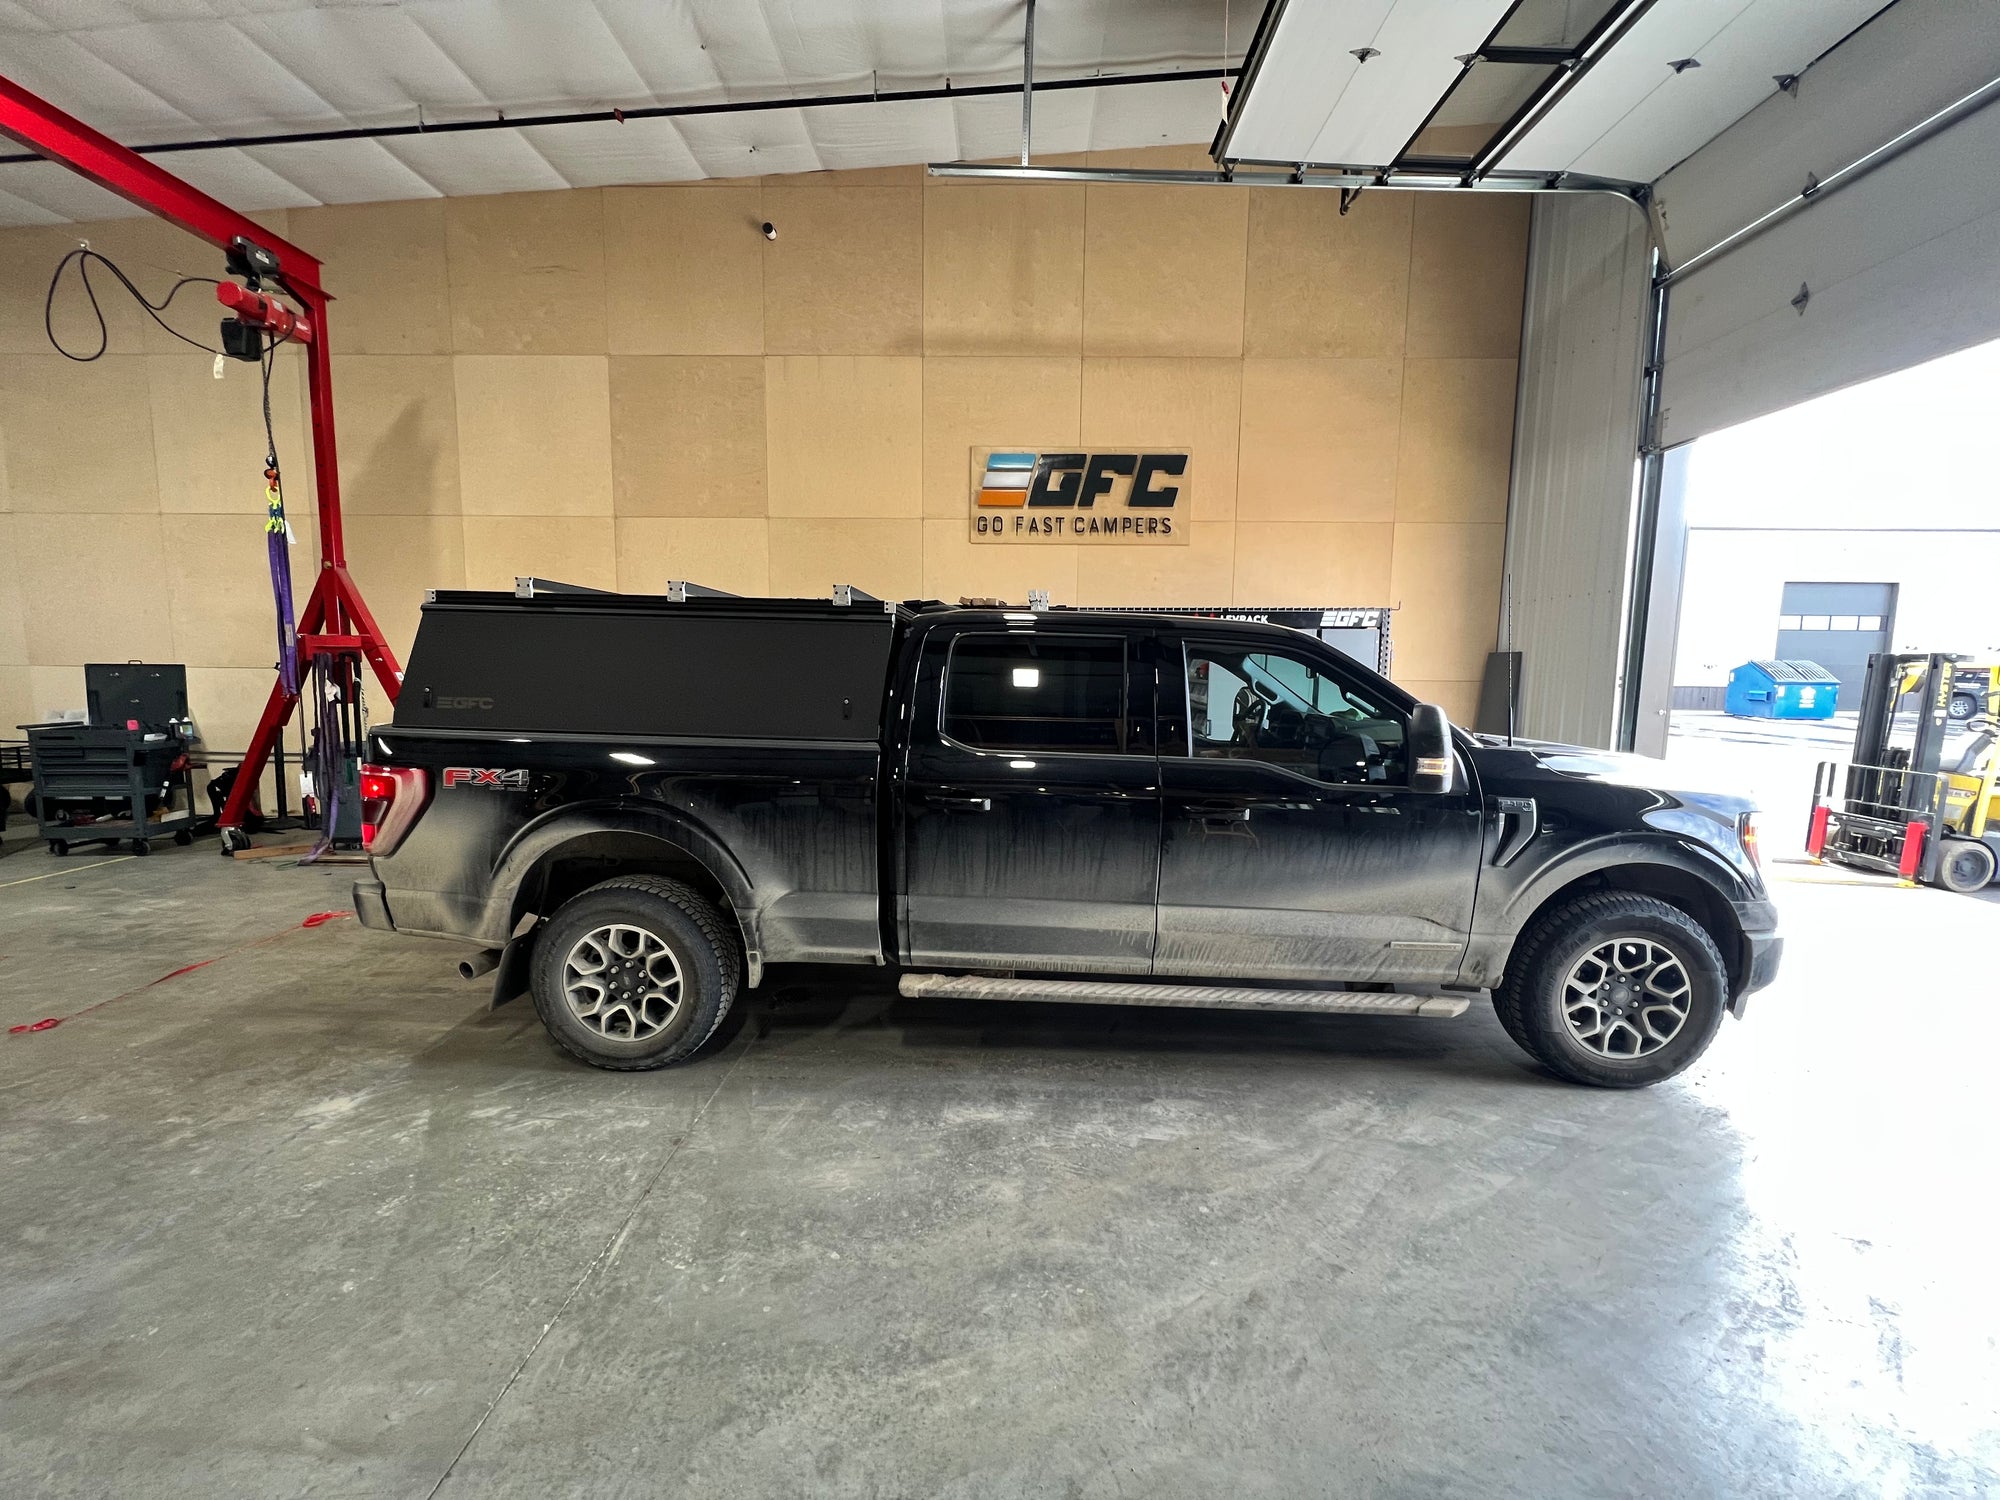 2020 Ford F150 Topper - Build #567